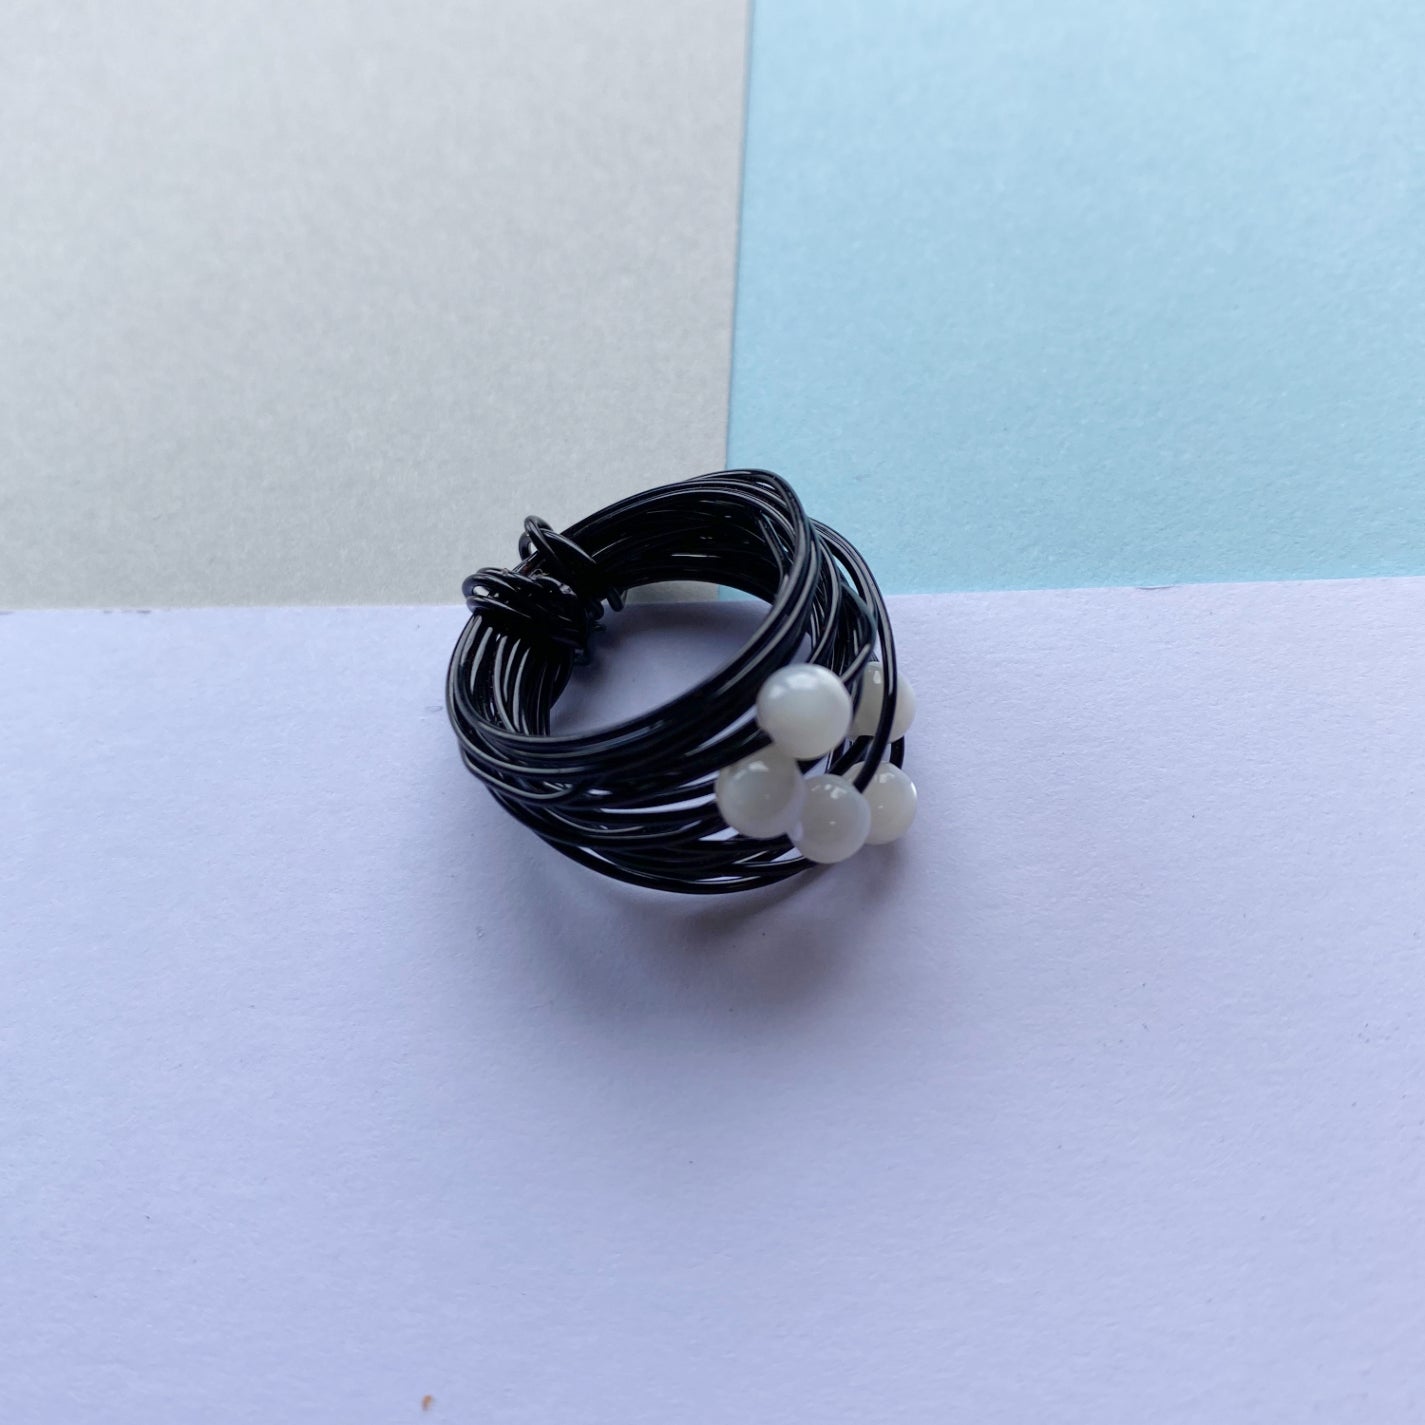 Wire Wrap Rings - silver/neutrals - small (h-o) - The Argentum Design Co